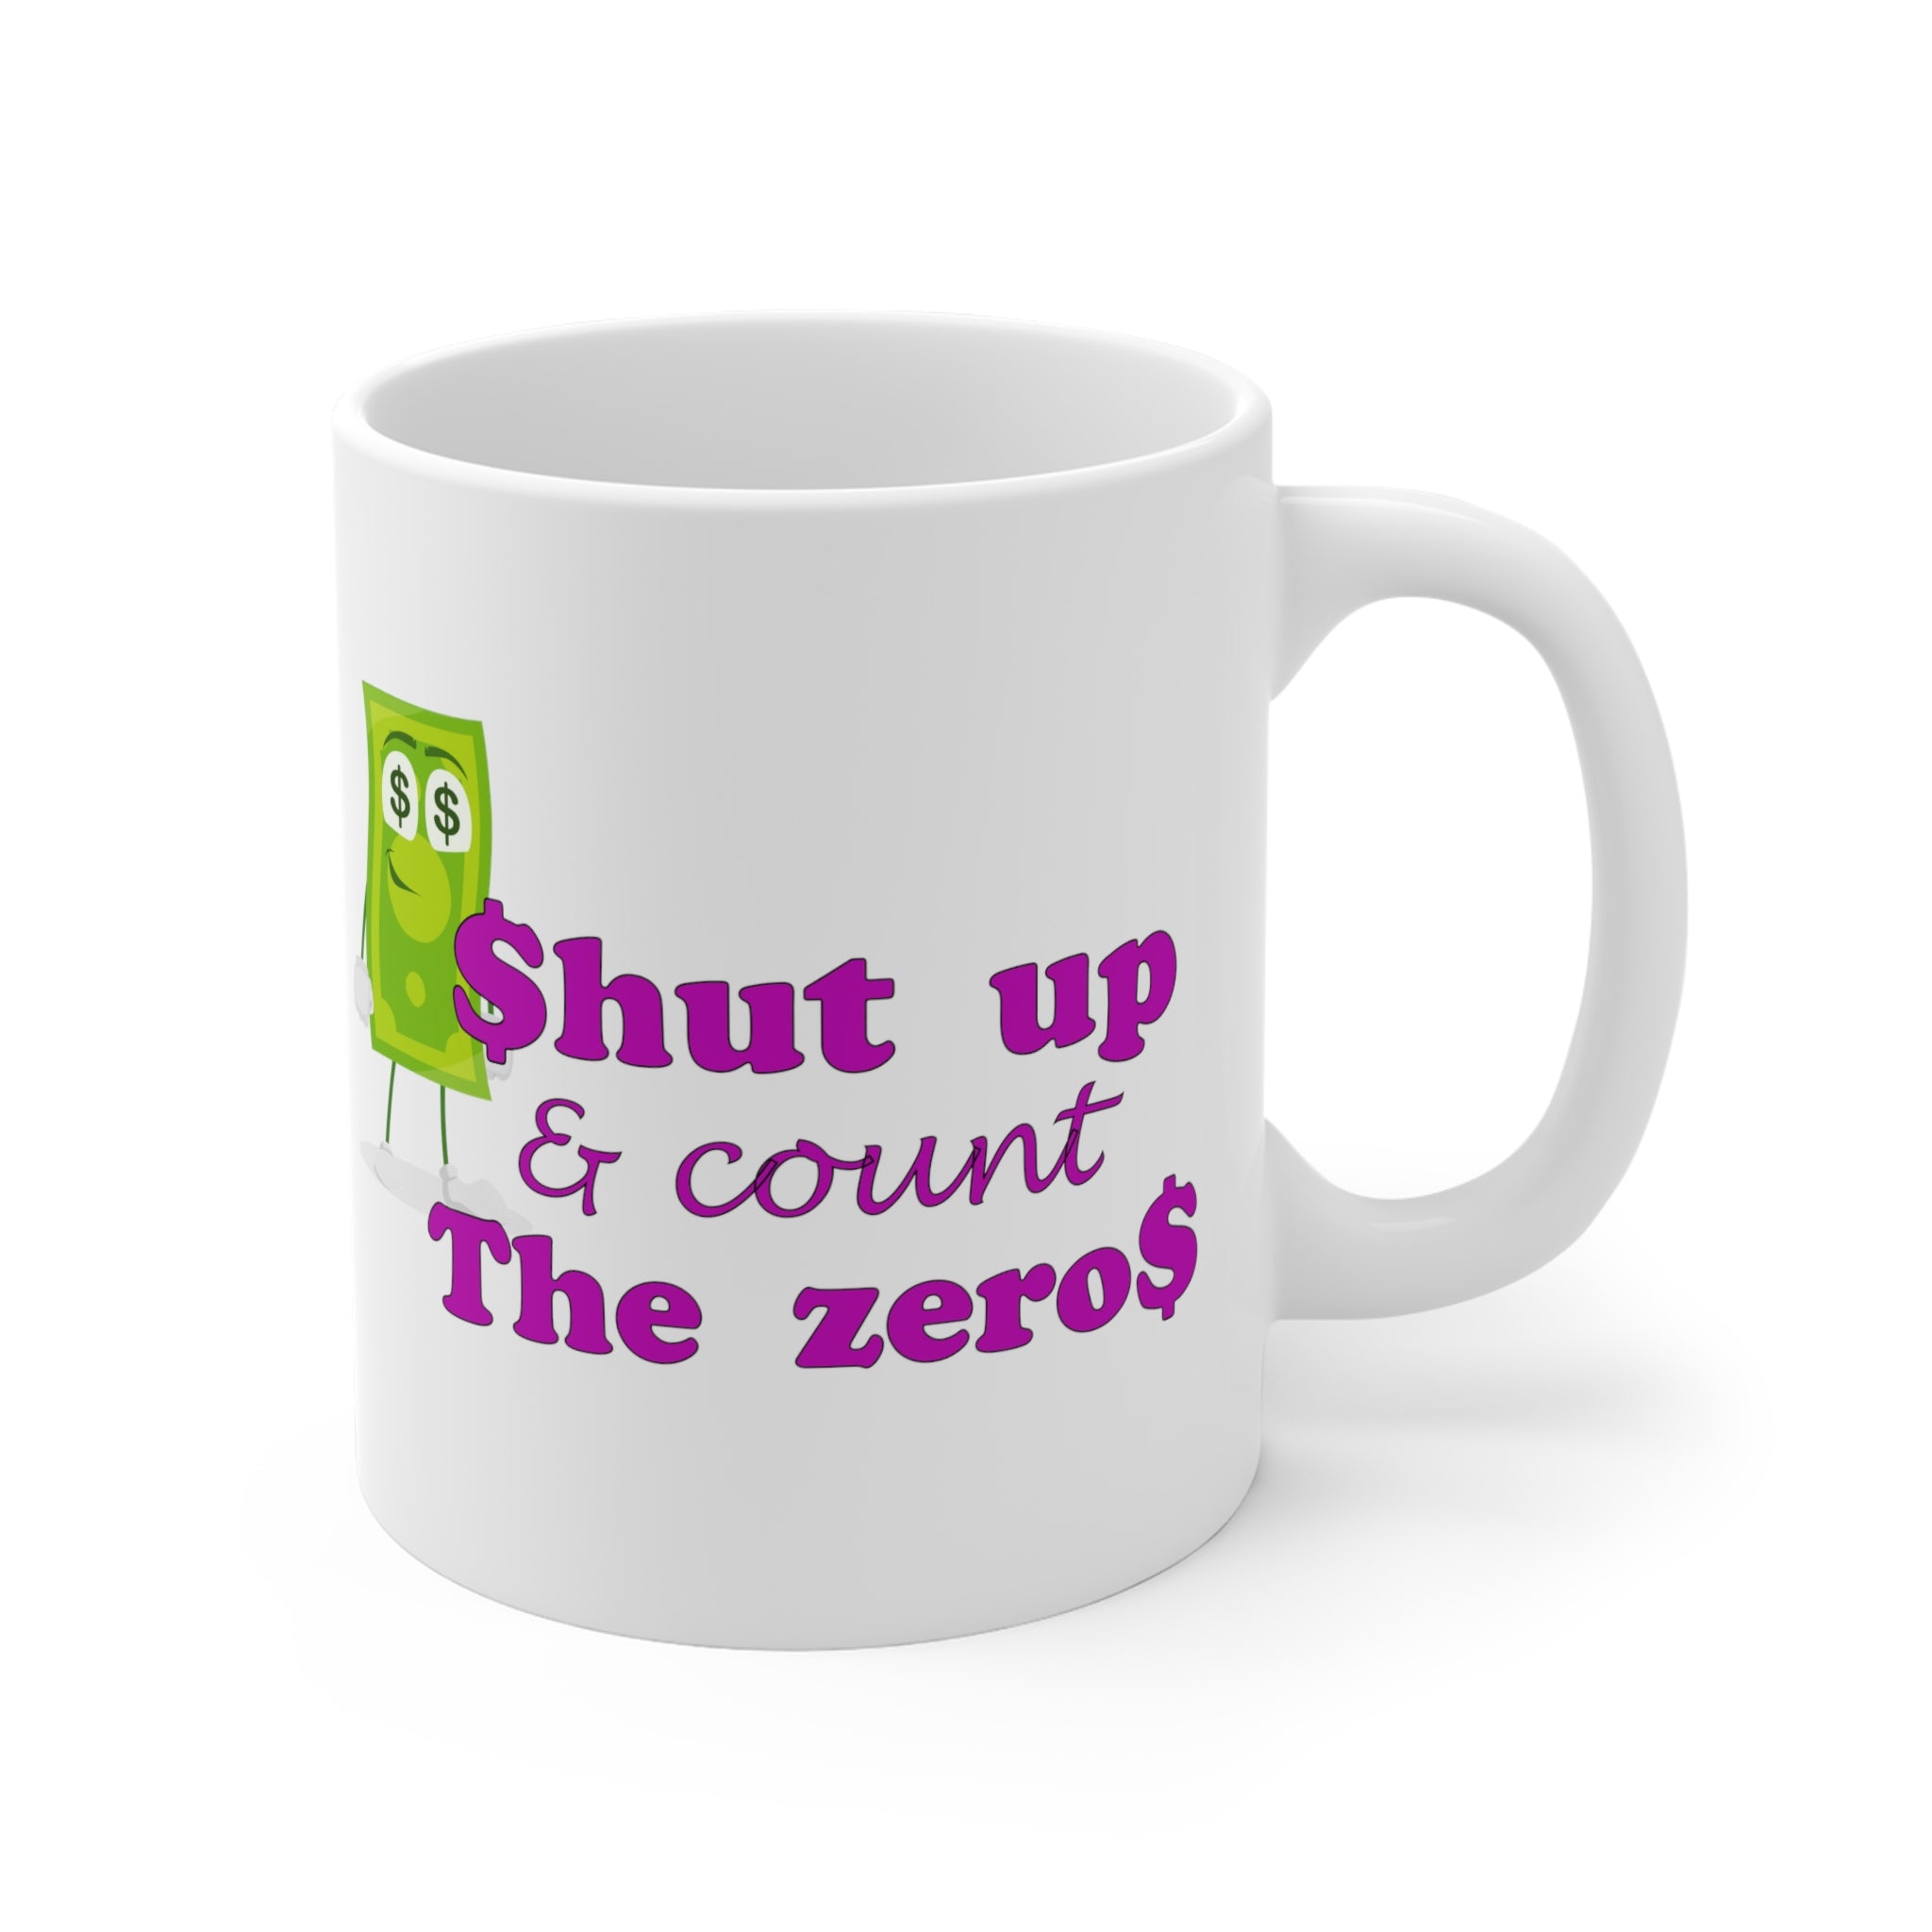 11oz ceramic mug with the caption 'shut up and count the zeros' and a happy dollar bill.